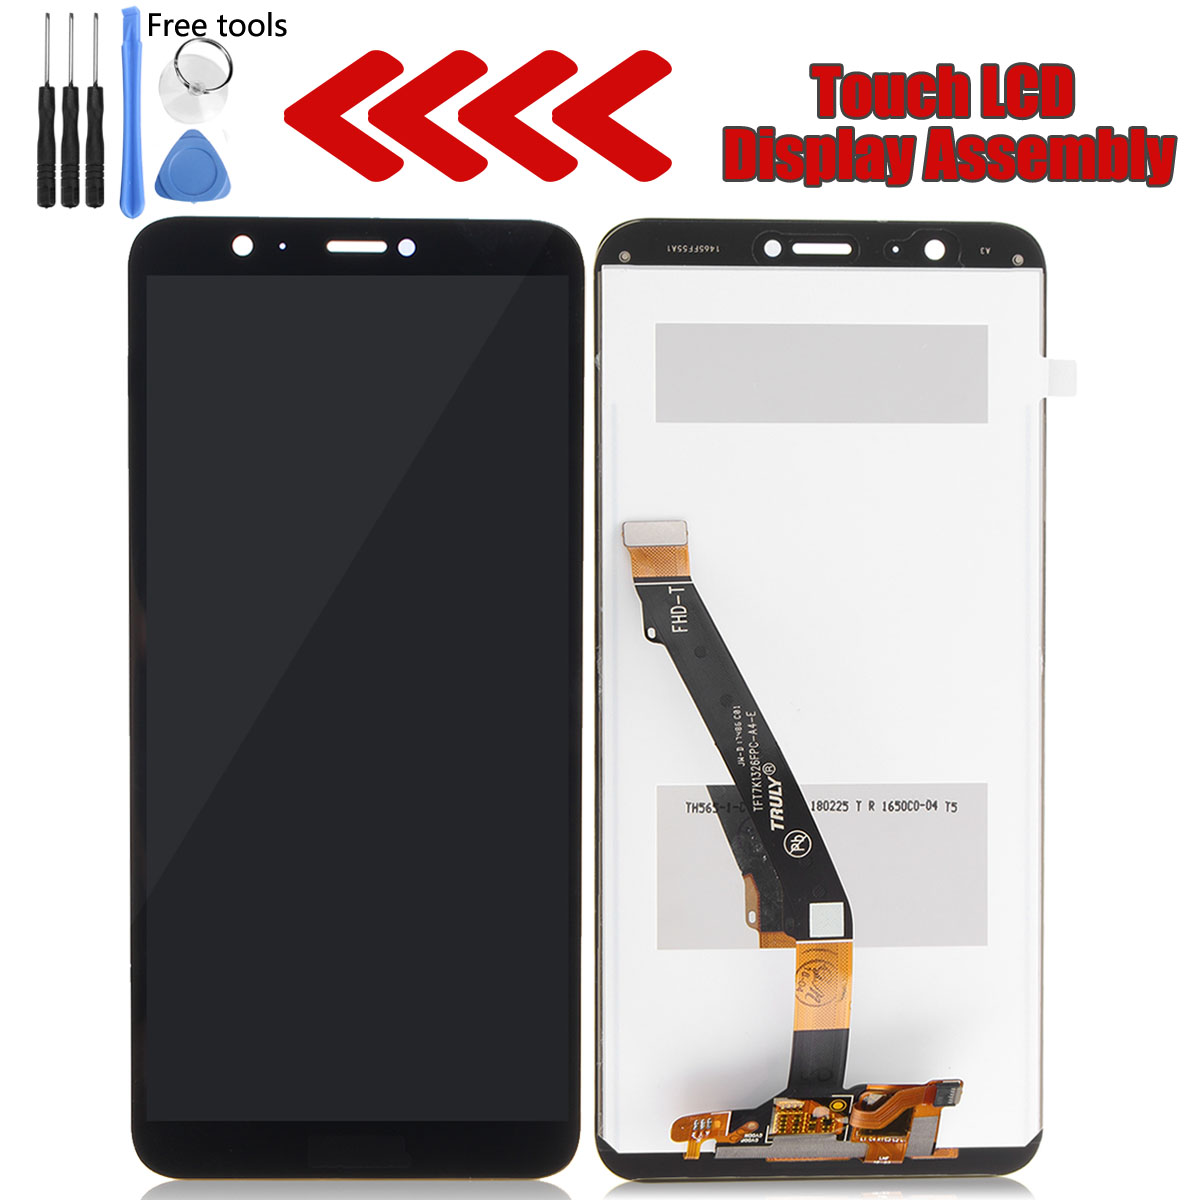 LCD-DisplayTouch-Screen-Screen-Replacement-For-Huawei-Enjoy-7S-Huawei-P-smart-FIG-LX1-LX2-LA1-1325730-1